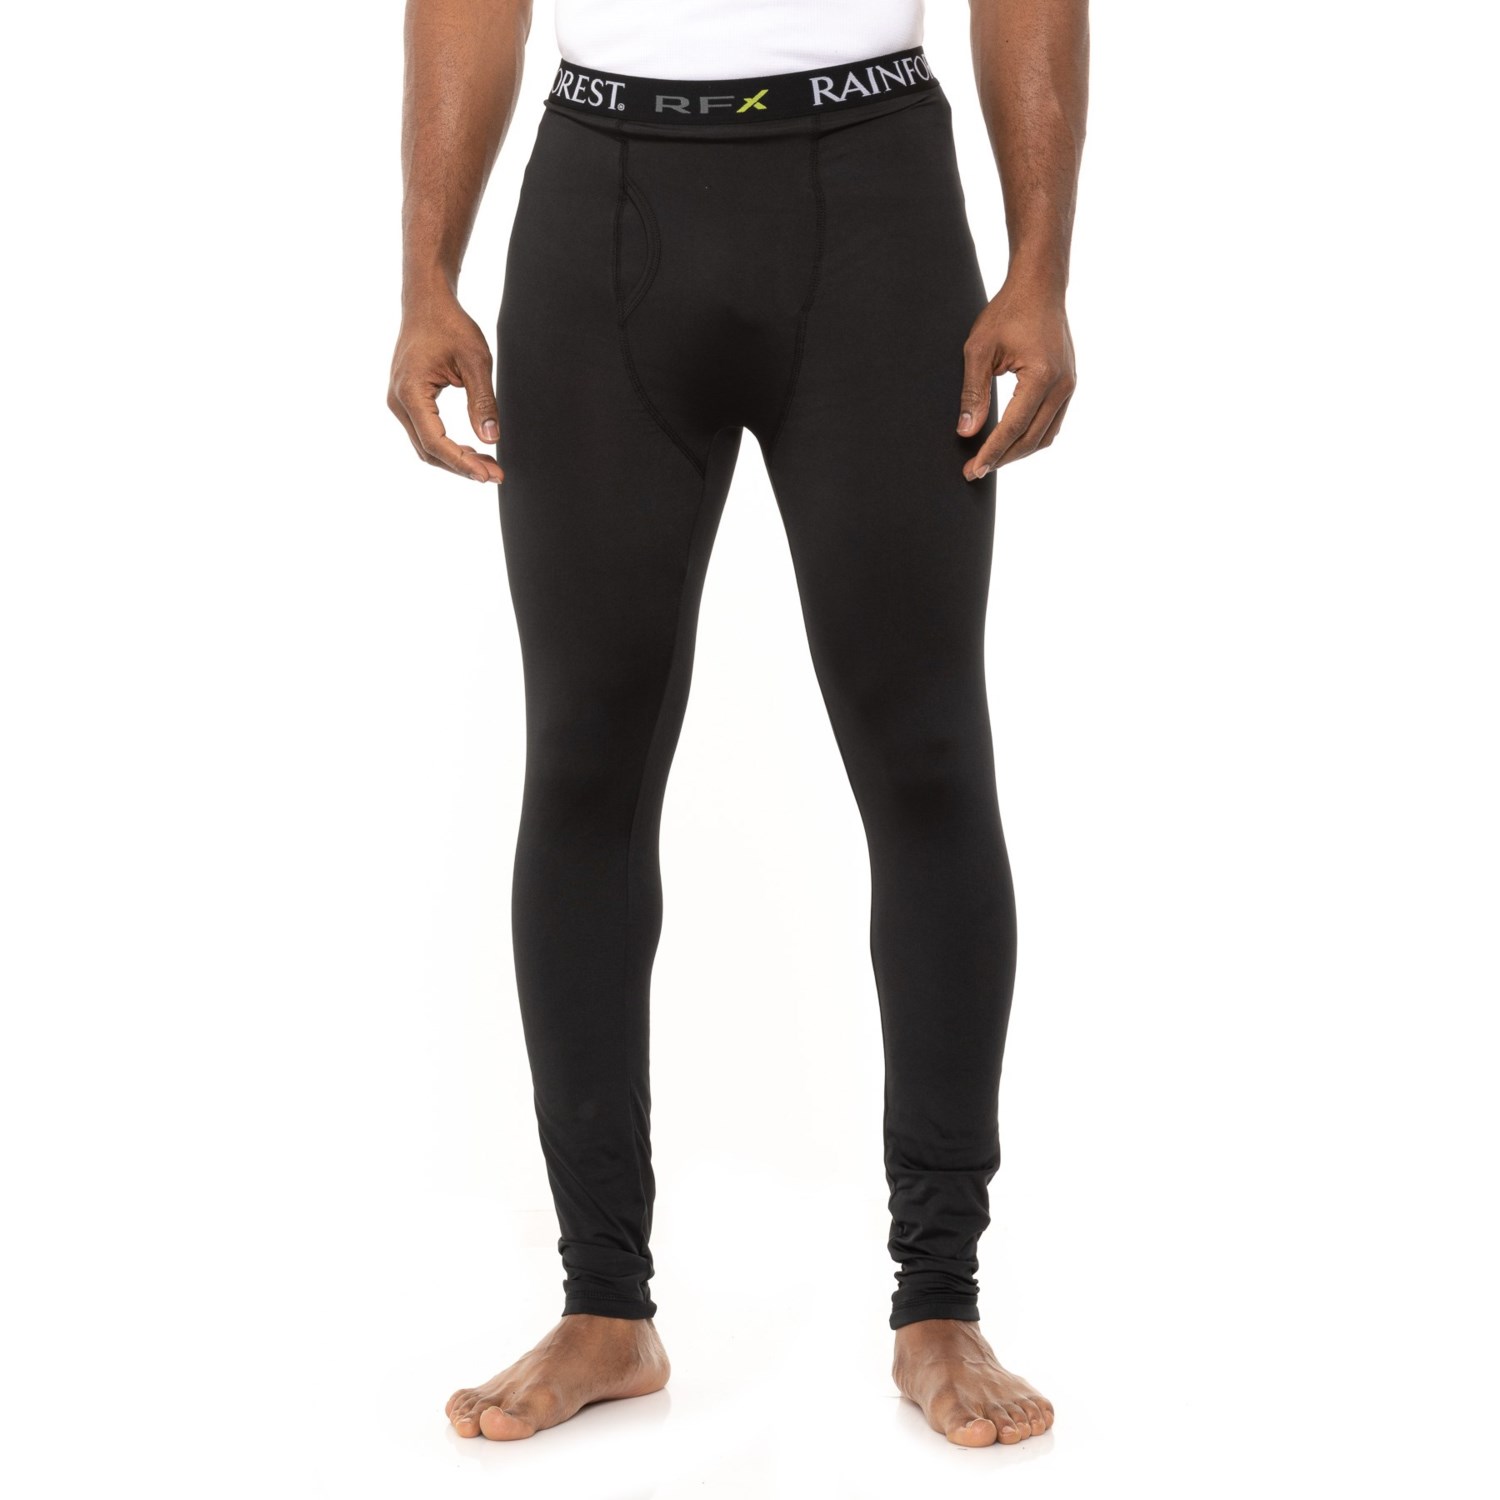 Rainforest High-Performance Base Layer Pants (For Men) - Save 50%